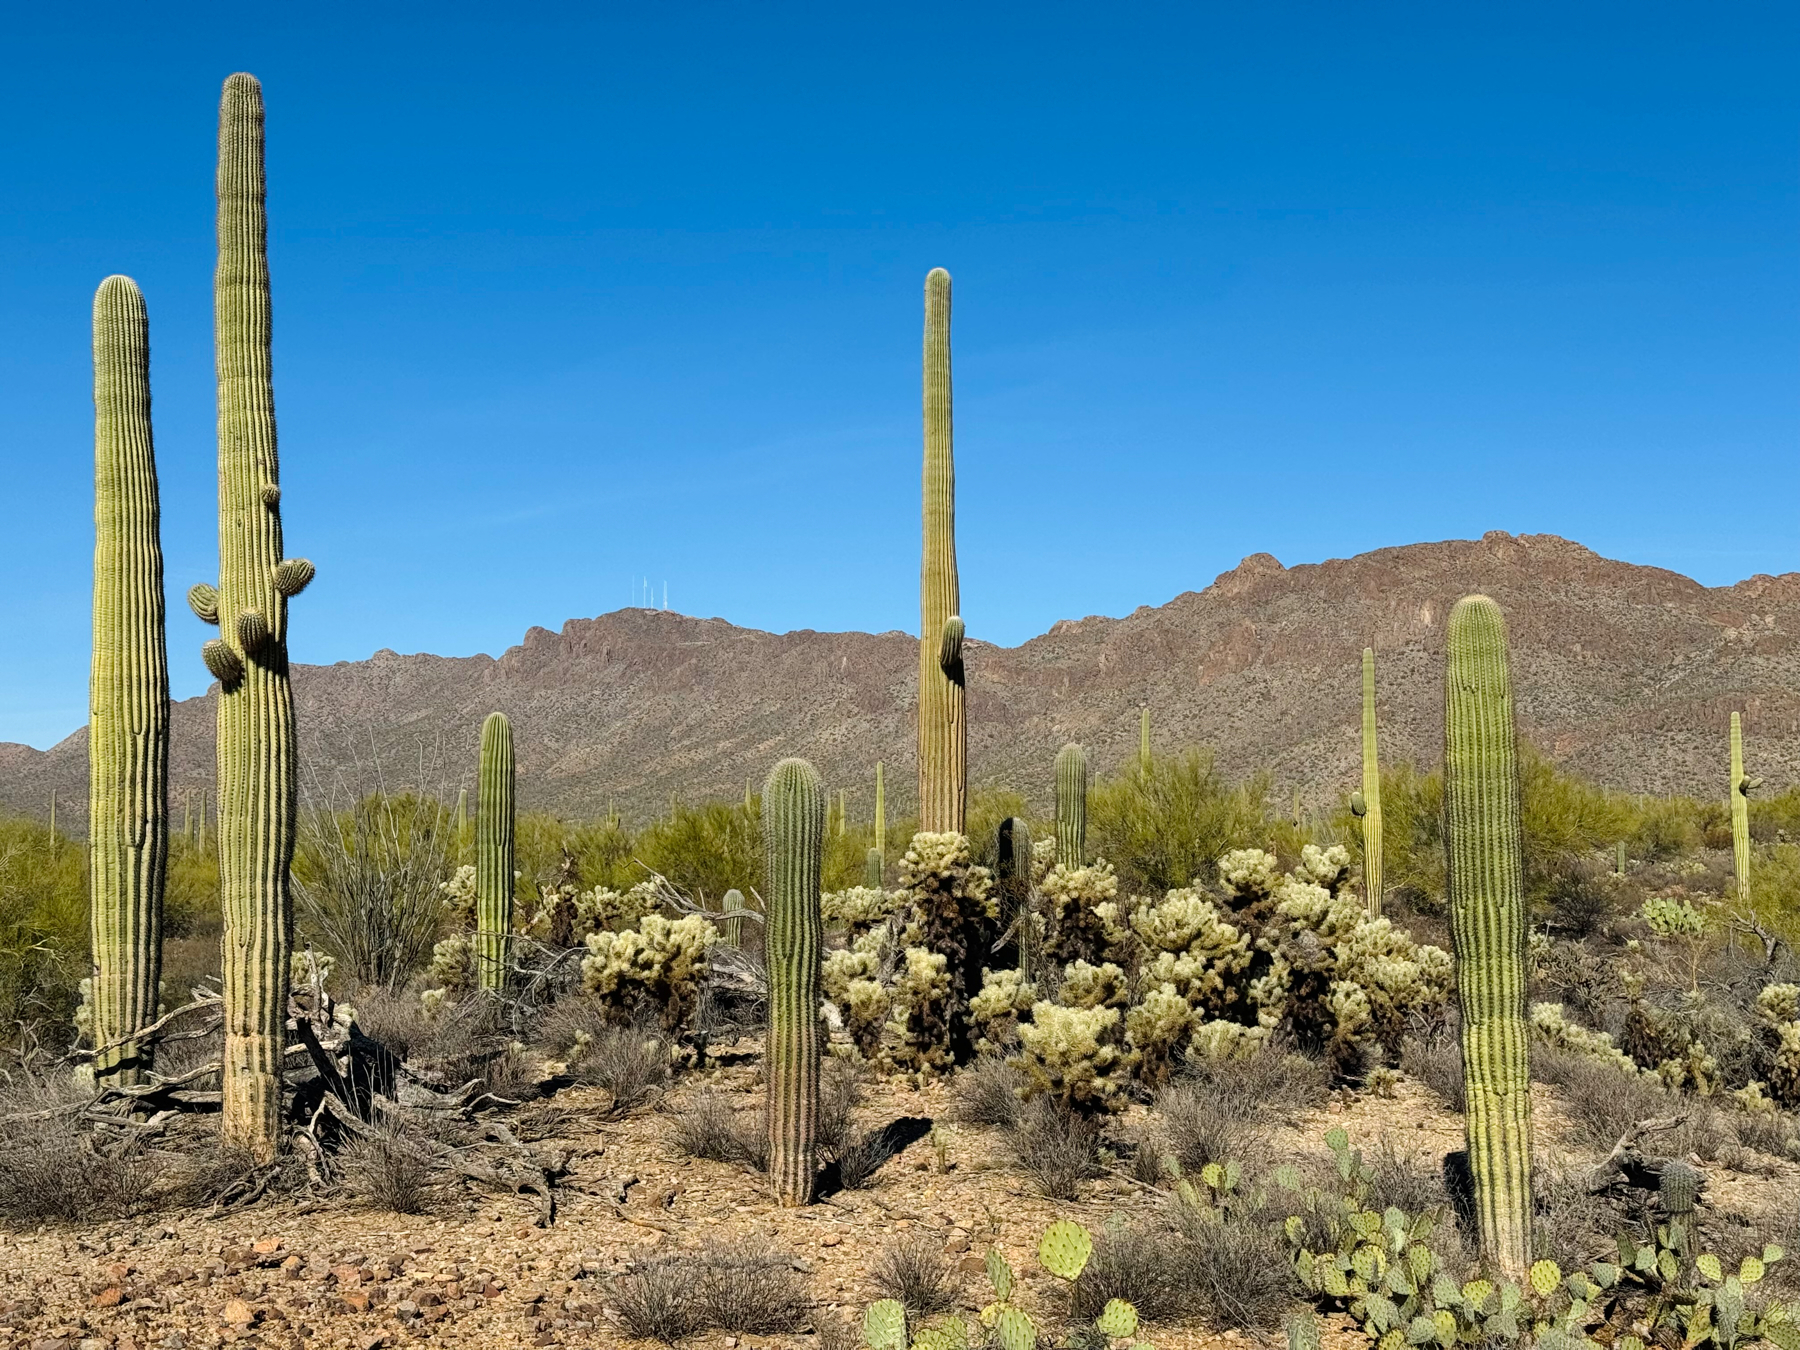 Desert landscape with several tall saguaro cacti, smaller cholla cacti, and prickly pear shrubs in the foreground, against a backdrop of a mountain range under a clear blue sky.